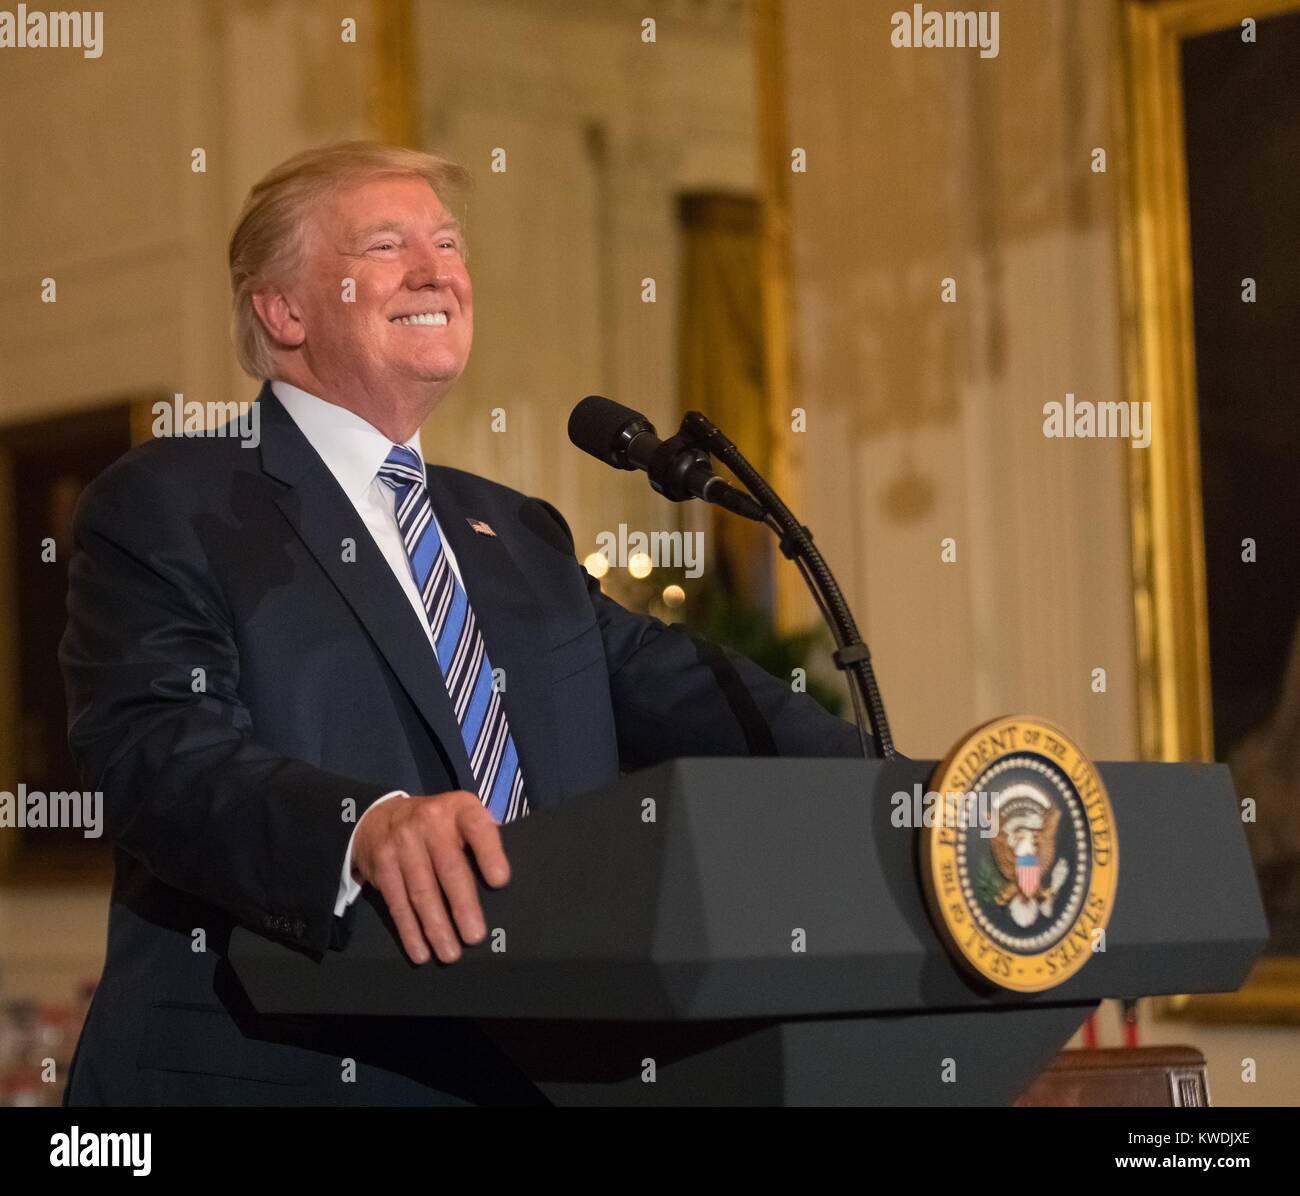 President Donald Trump speaks at the White House Made in America Showcase, July 17, 2017 (BSLOC 2017 19 10) Stock Photo